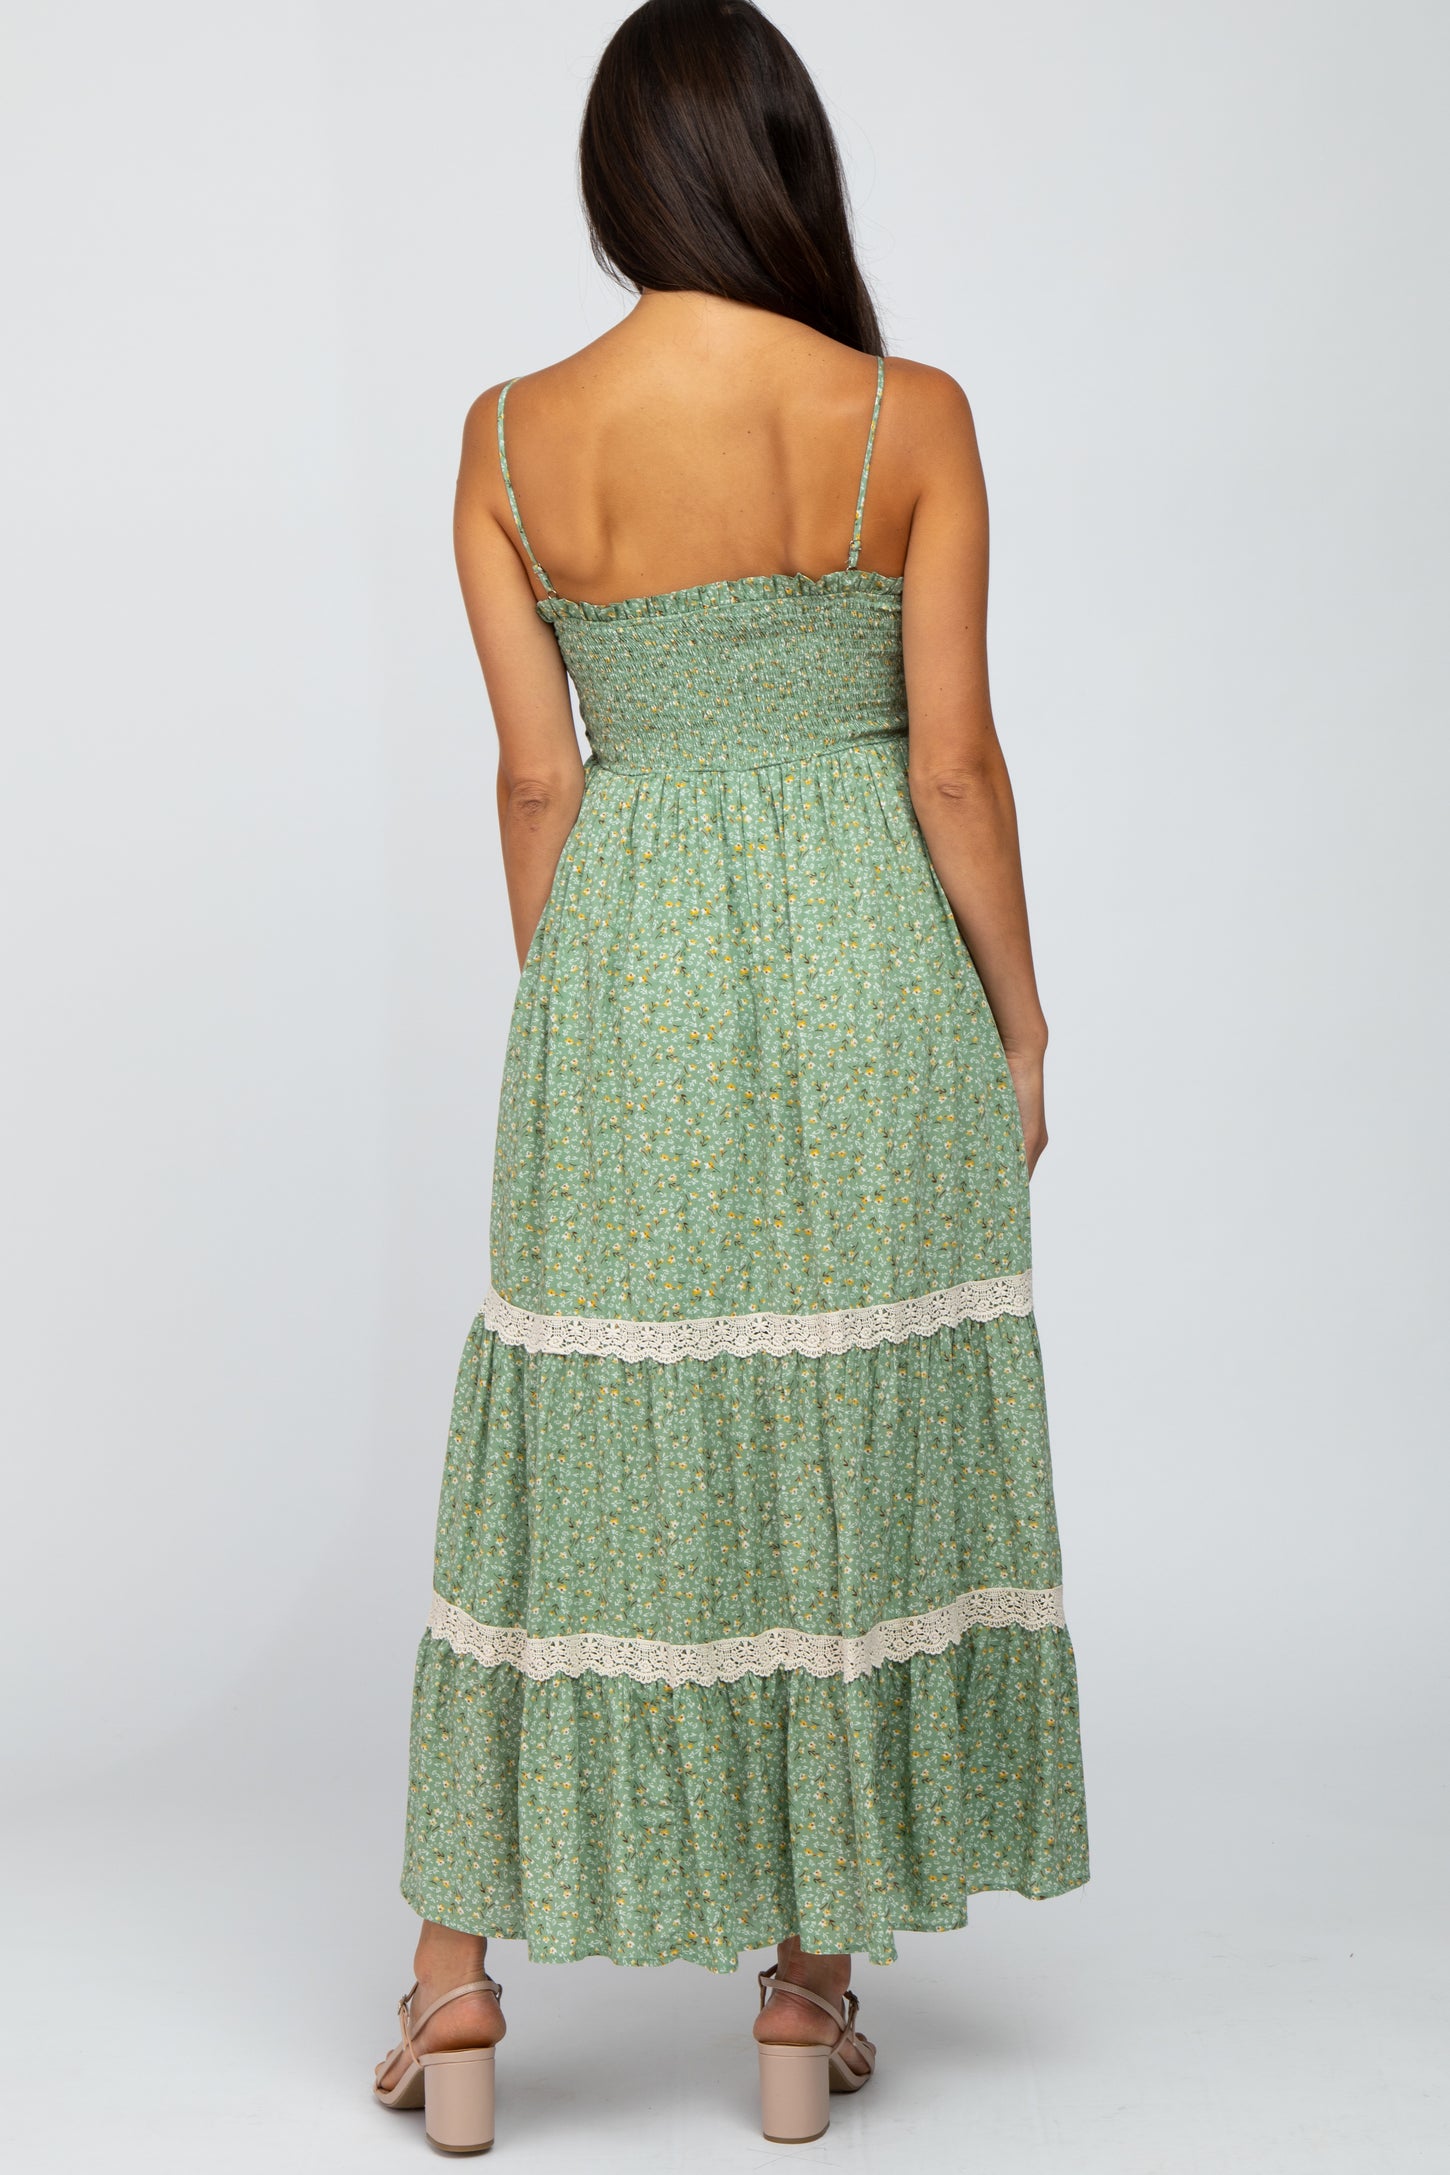 Green Floral Smocked Crochet Accent Maxi Dress